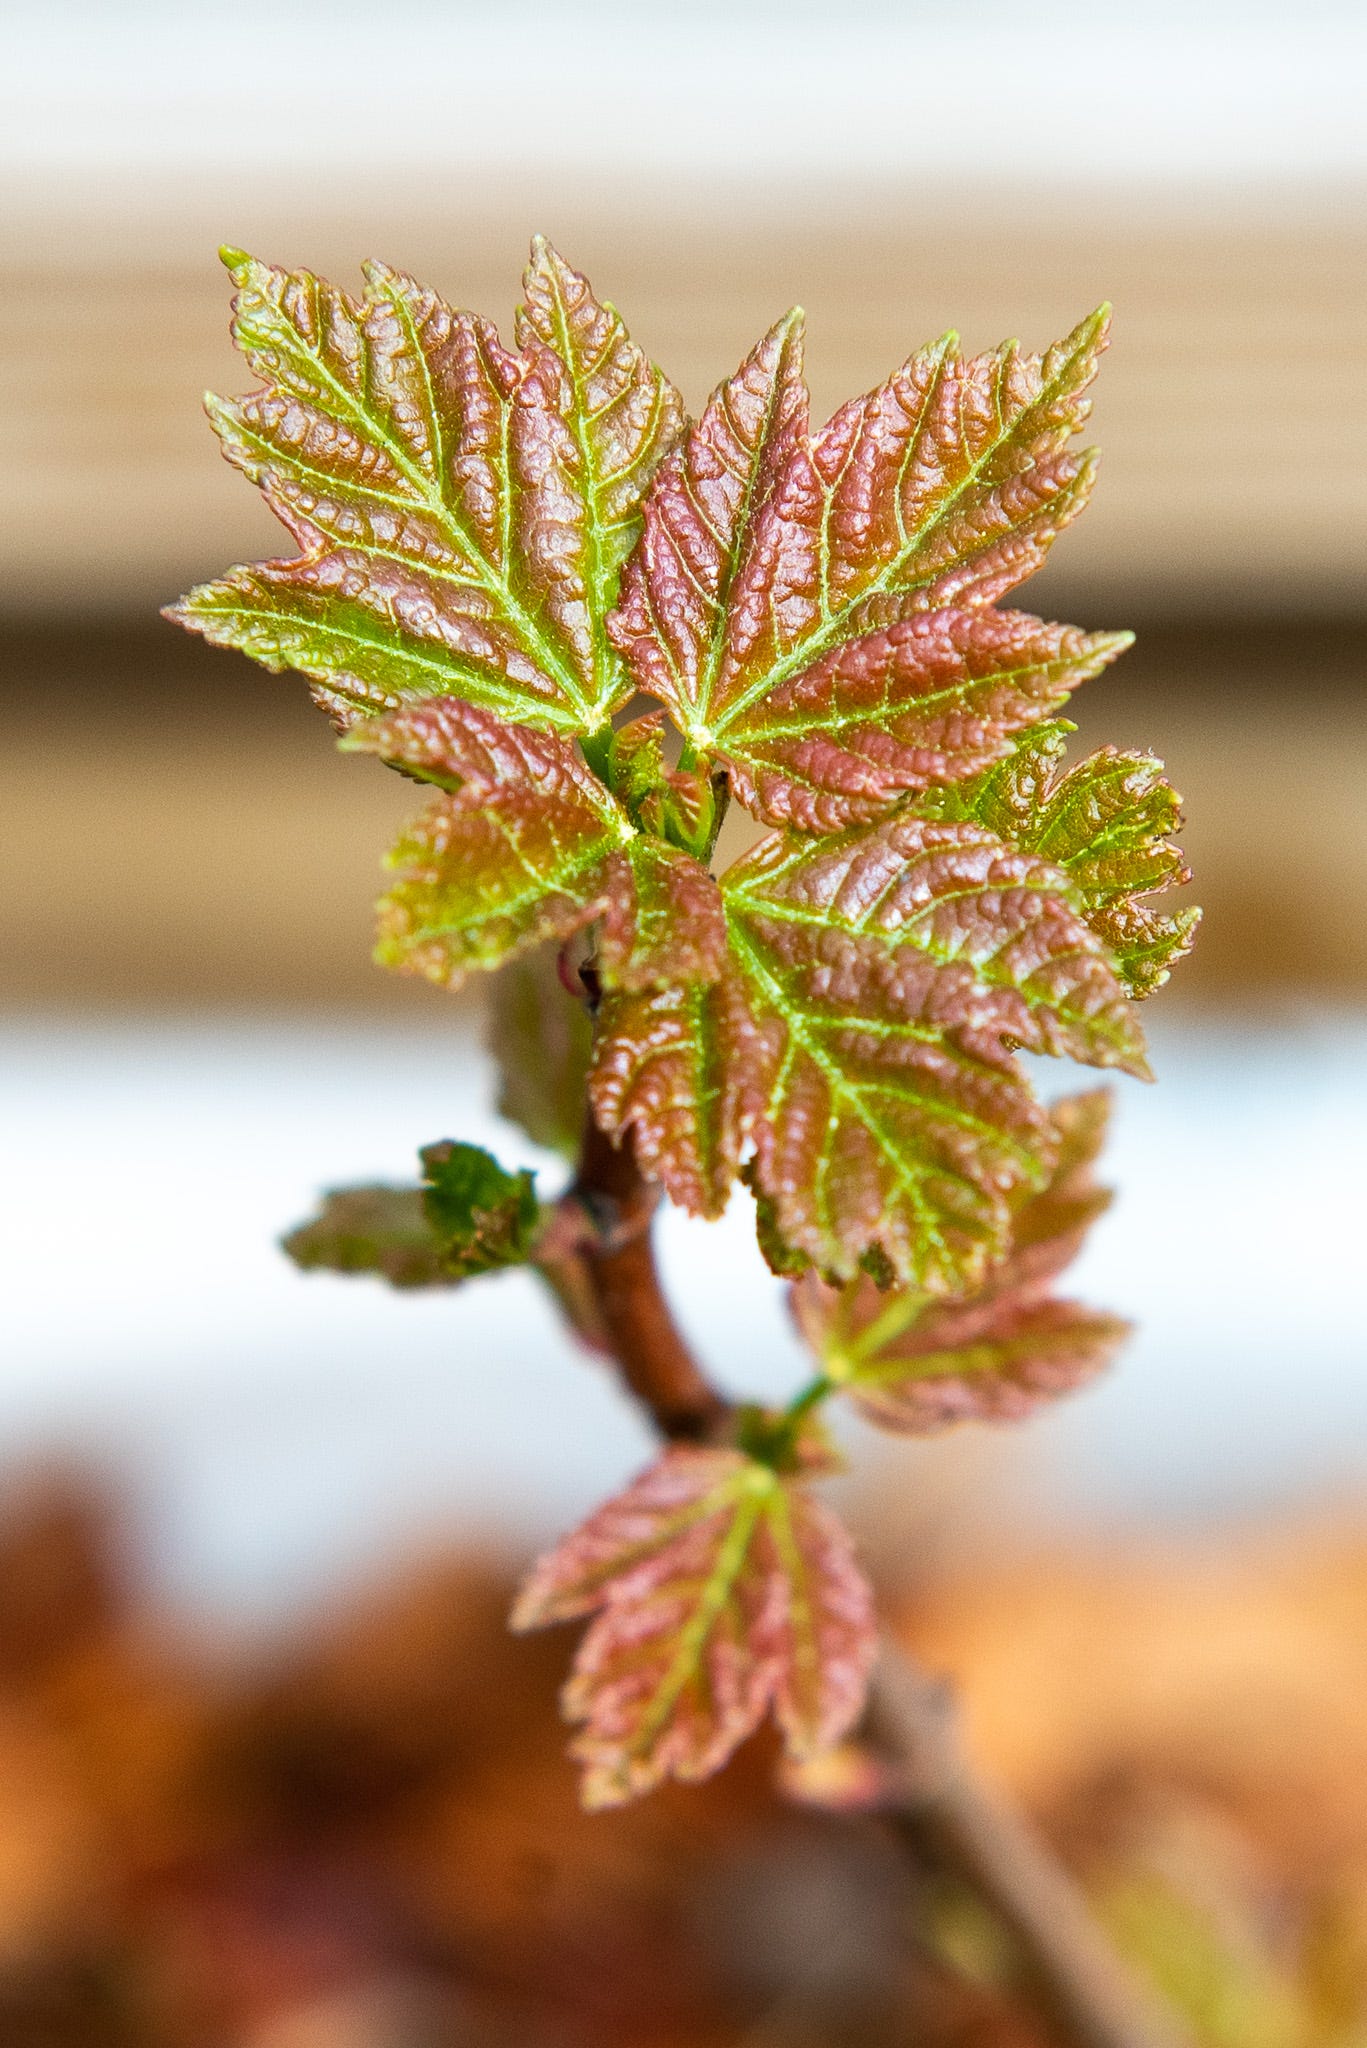 ID: Close up photo of young maple leaves emerging from buds. The leaves are light green and tinged with red in the center.